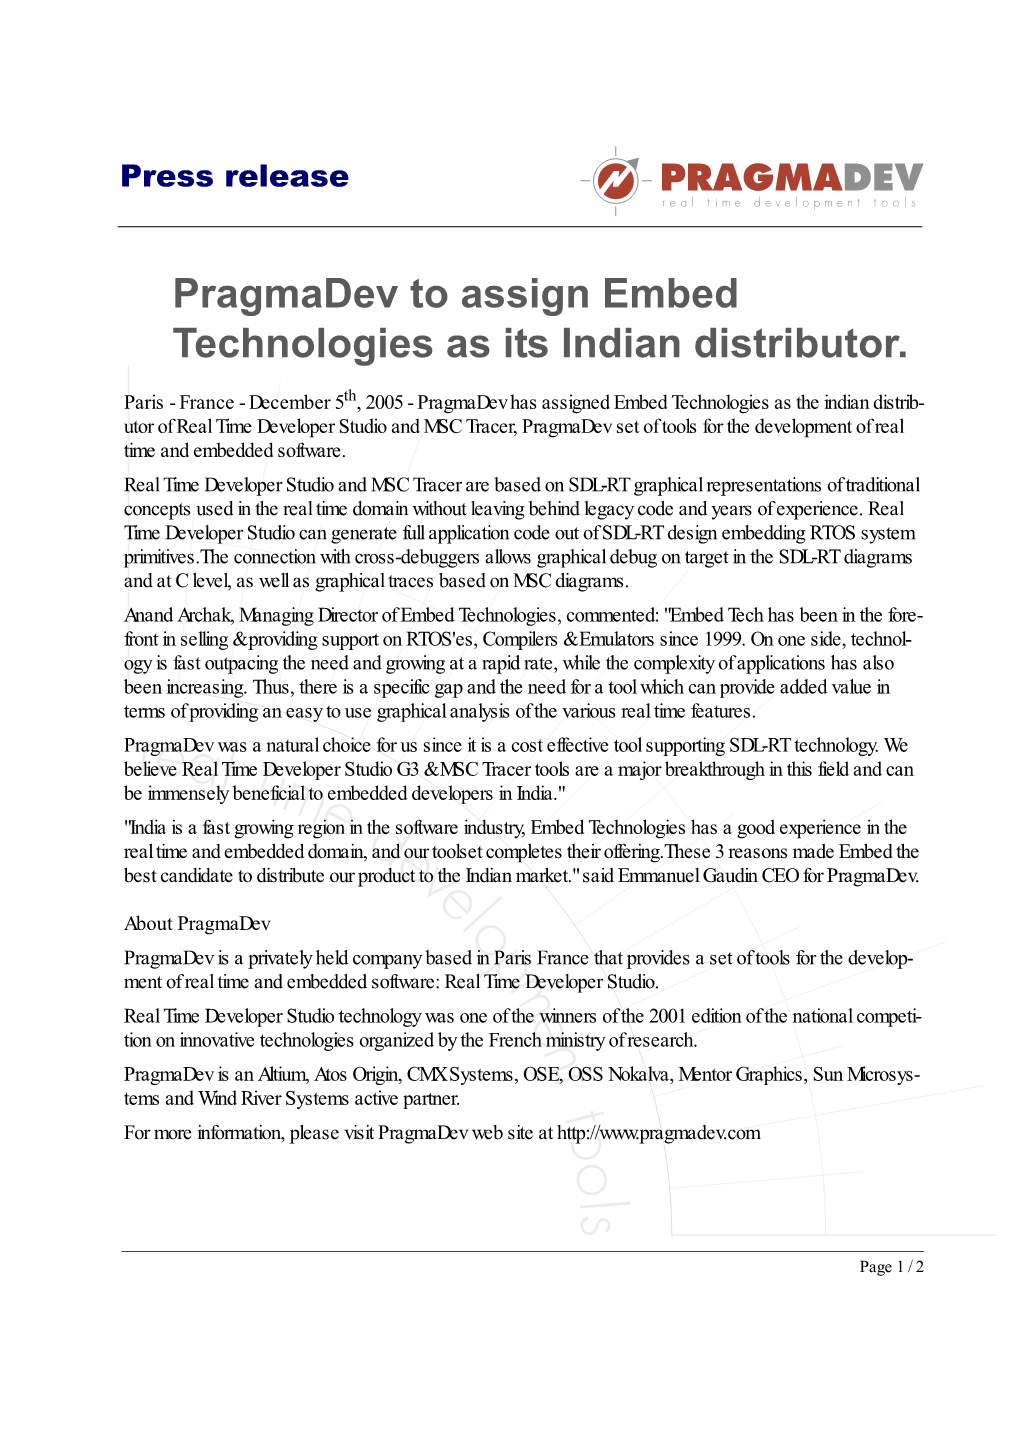 Pragmadev to Assign Embed Tech As Its Indian Distributor